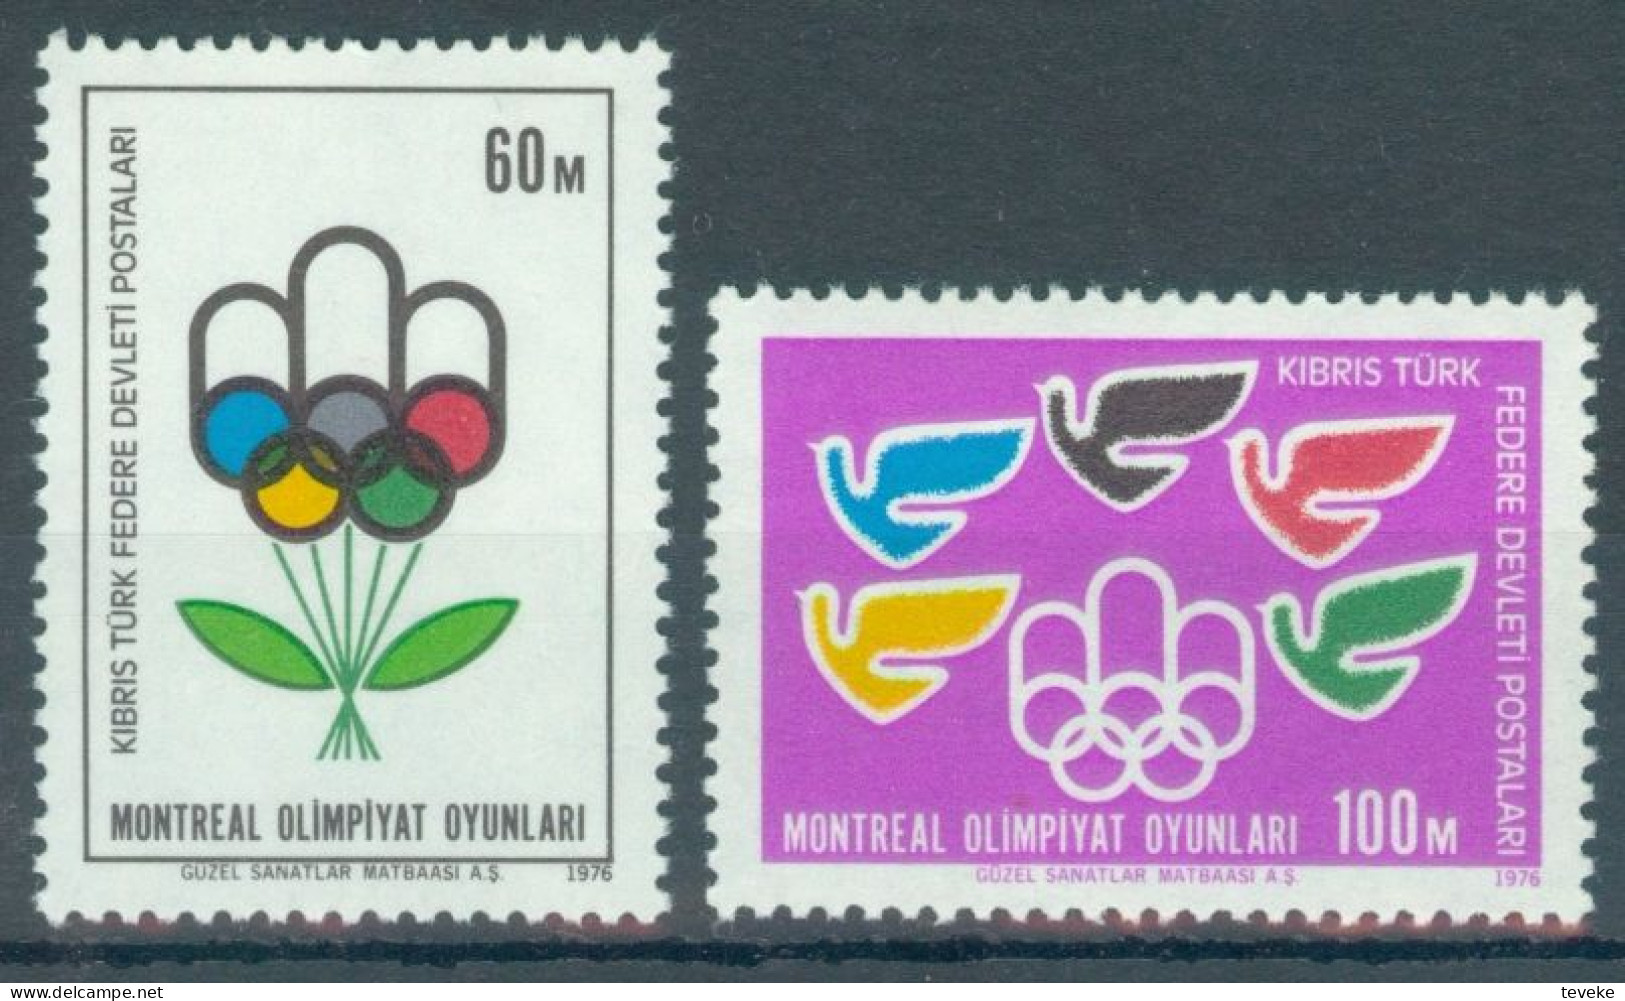 TURKISH CYPRUS 1976 - Michel Nr. 34/35 - MNH ** - Olympic Games, Montreal - Unused Stamps